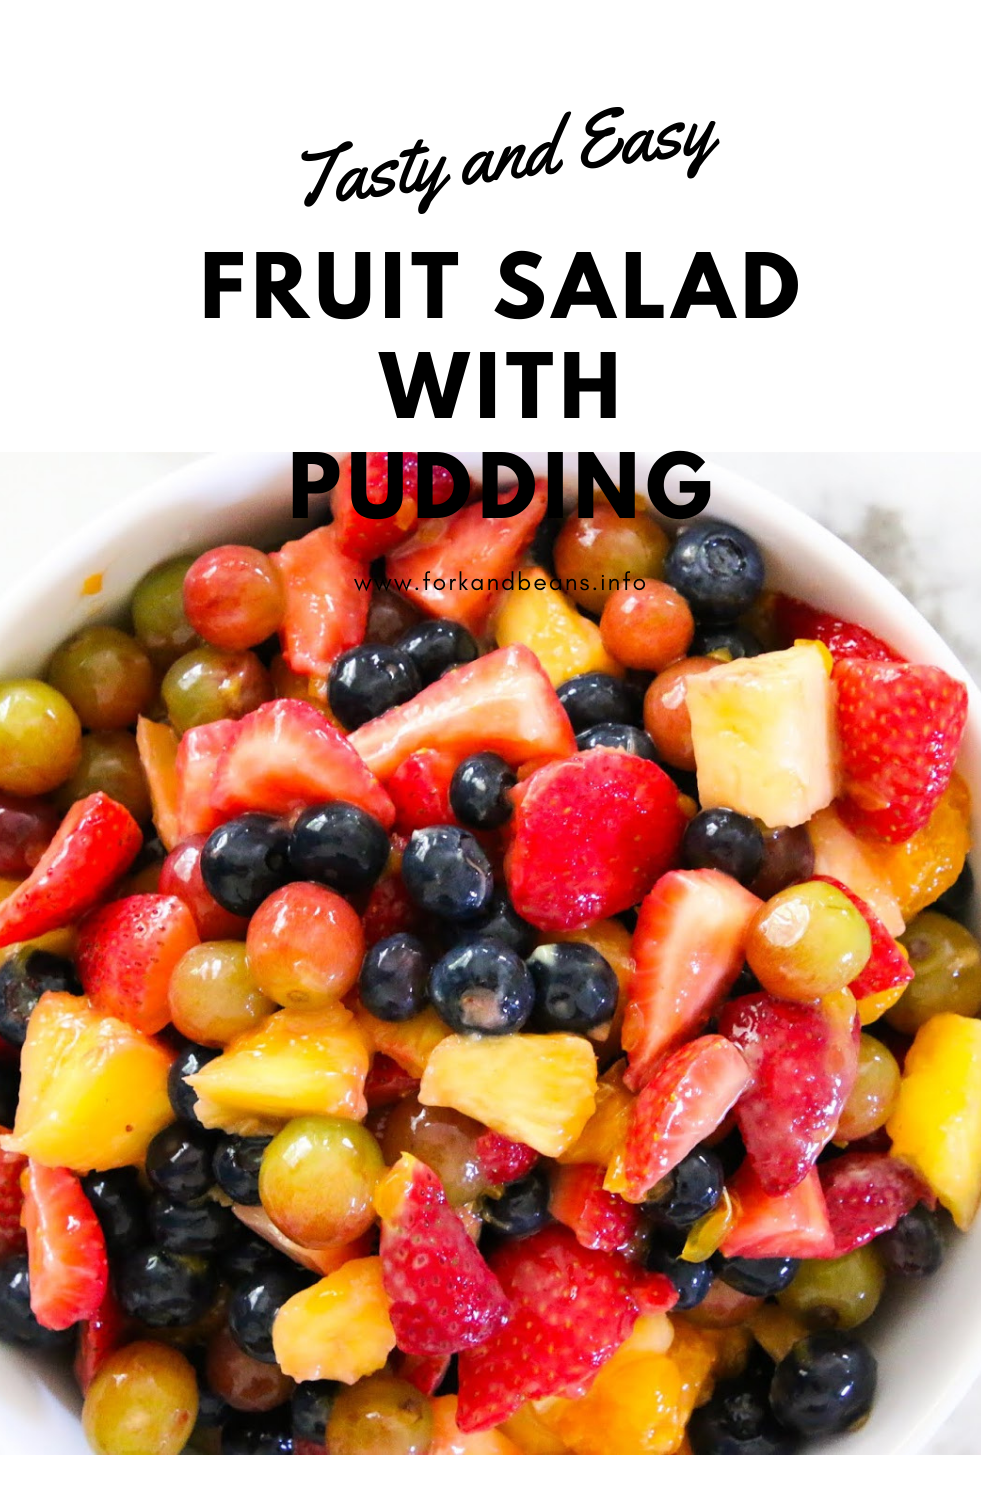 The Best Fruiit Salad with Pudding